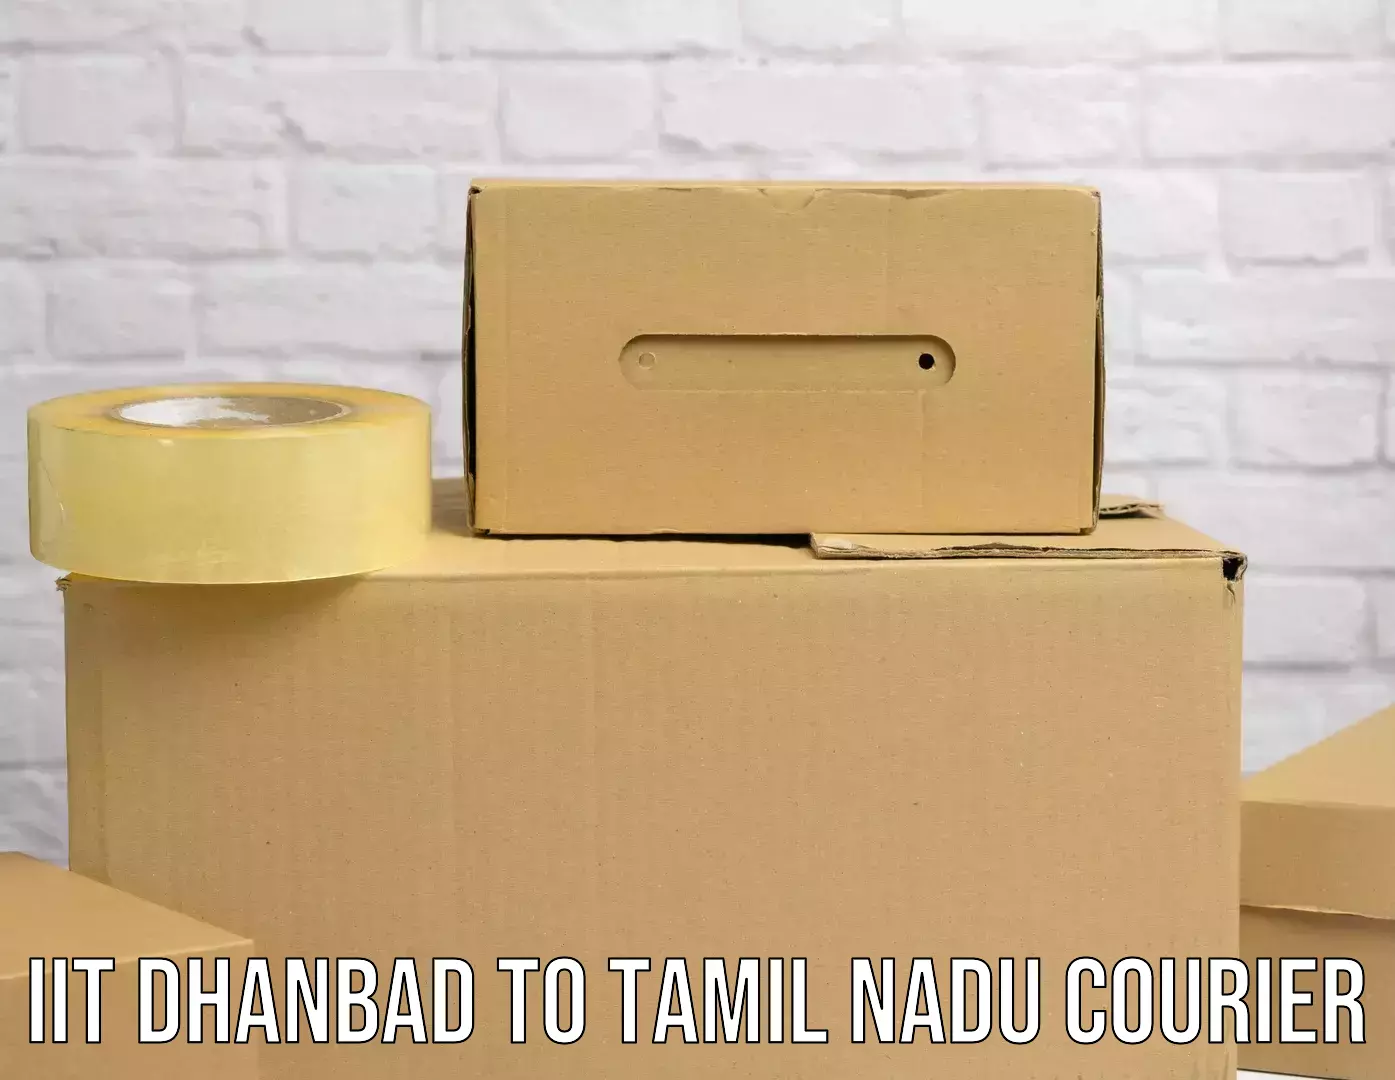 Customizable delivery plans IIT Dhanbad to Mettur